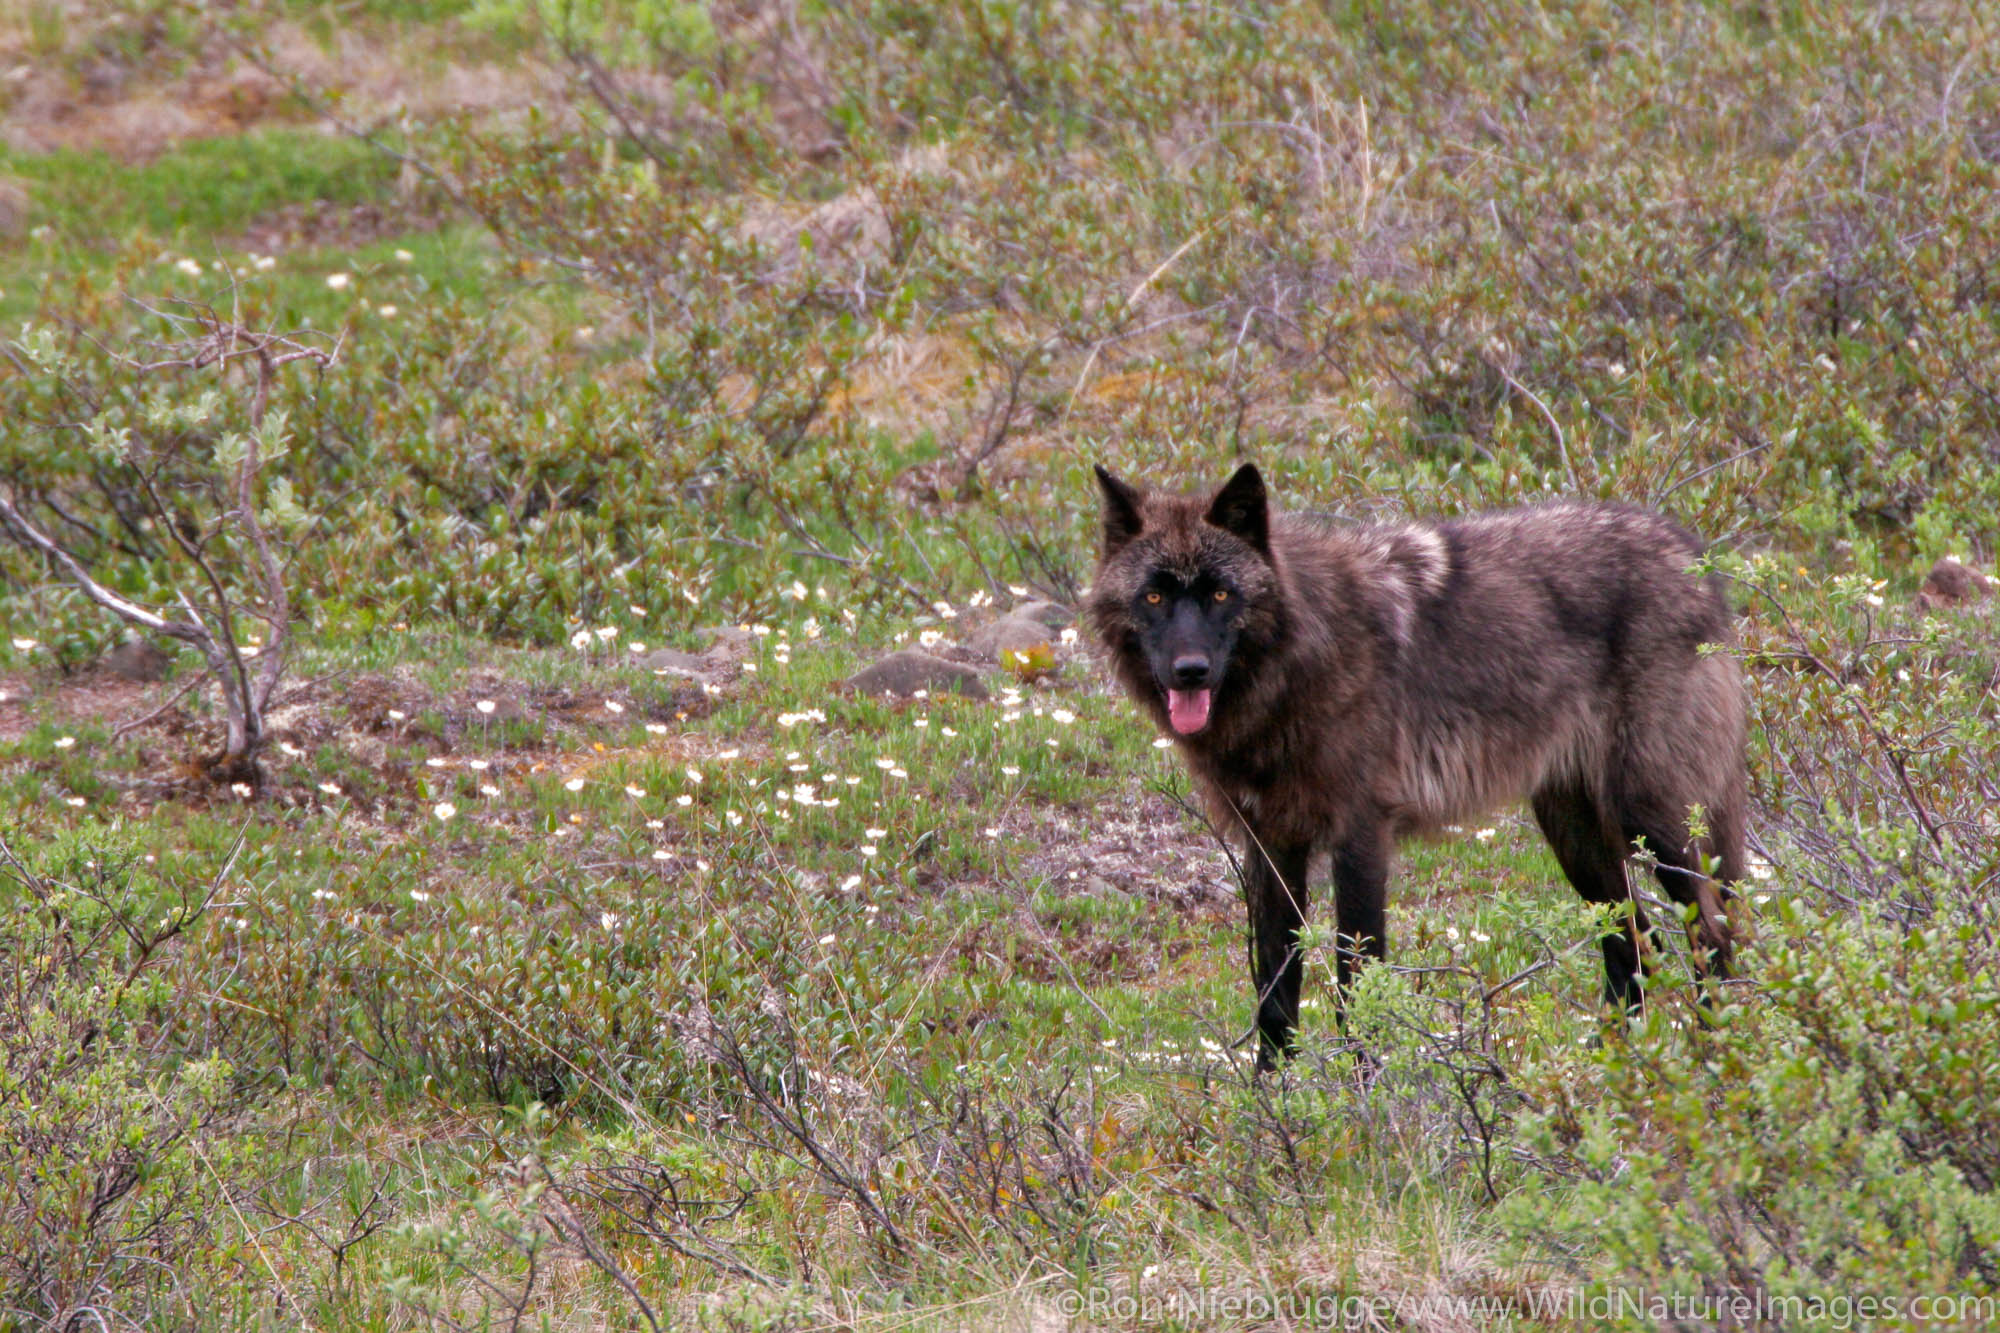 Wolves (Canis lupus) from the Grant Creek pack in Denali National Park, Alaska.